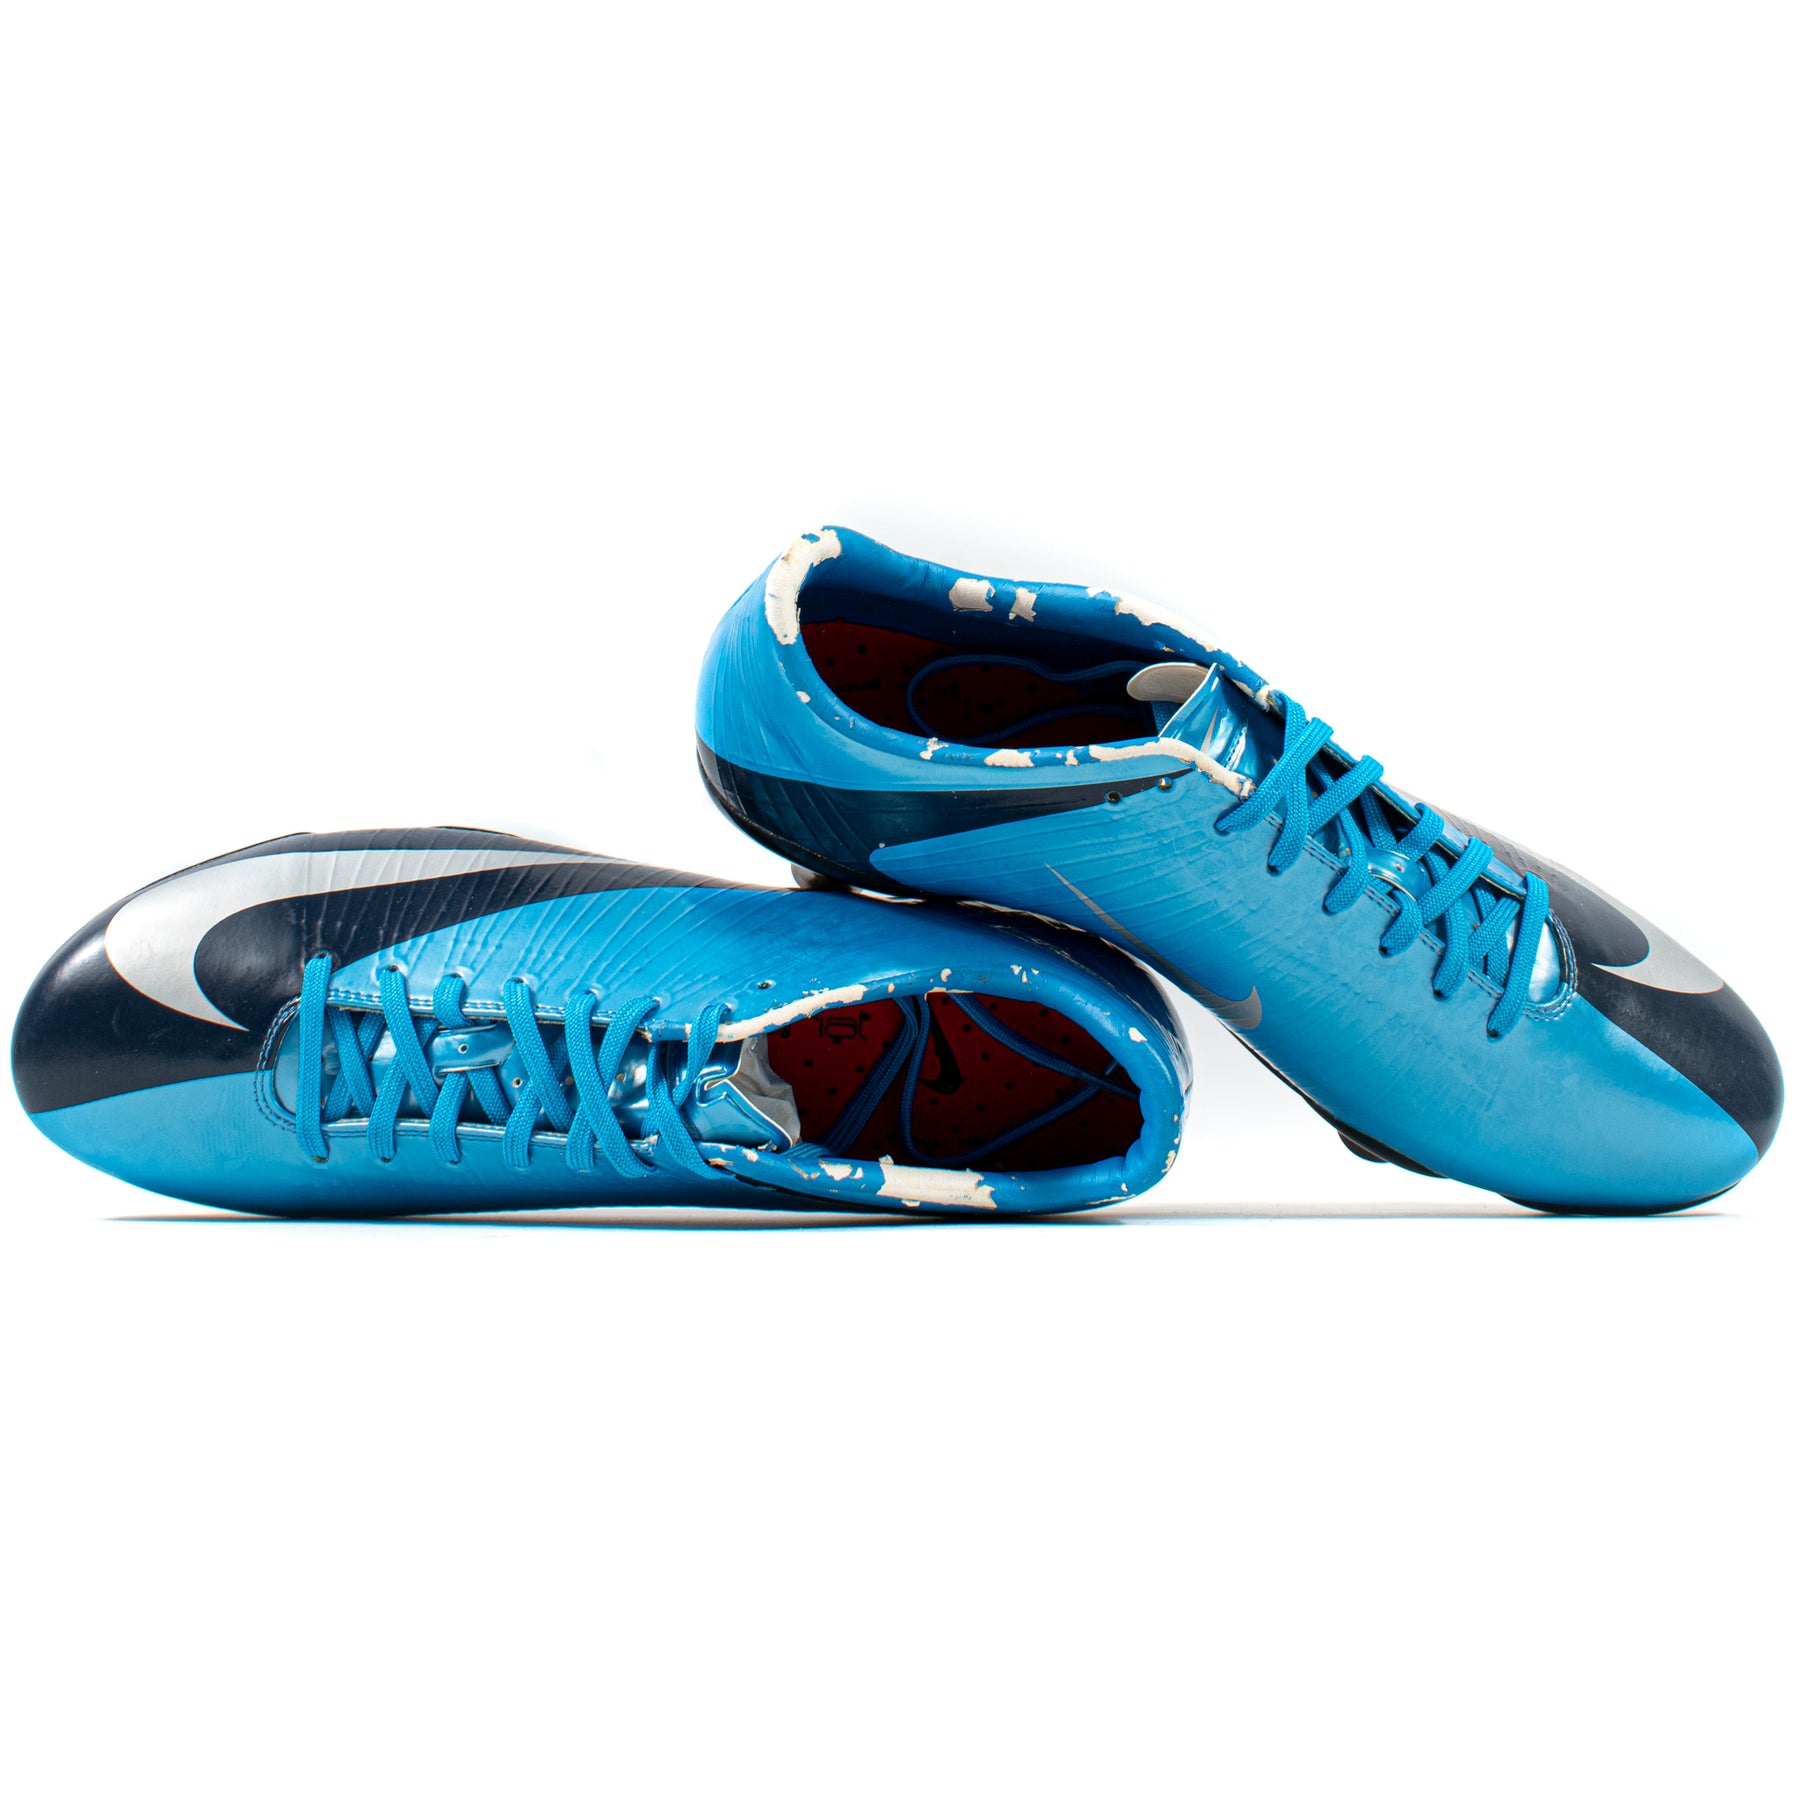 Nike Vapor Superfly Blue – Classic Soccer Cleats